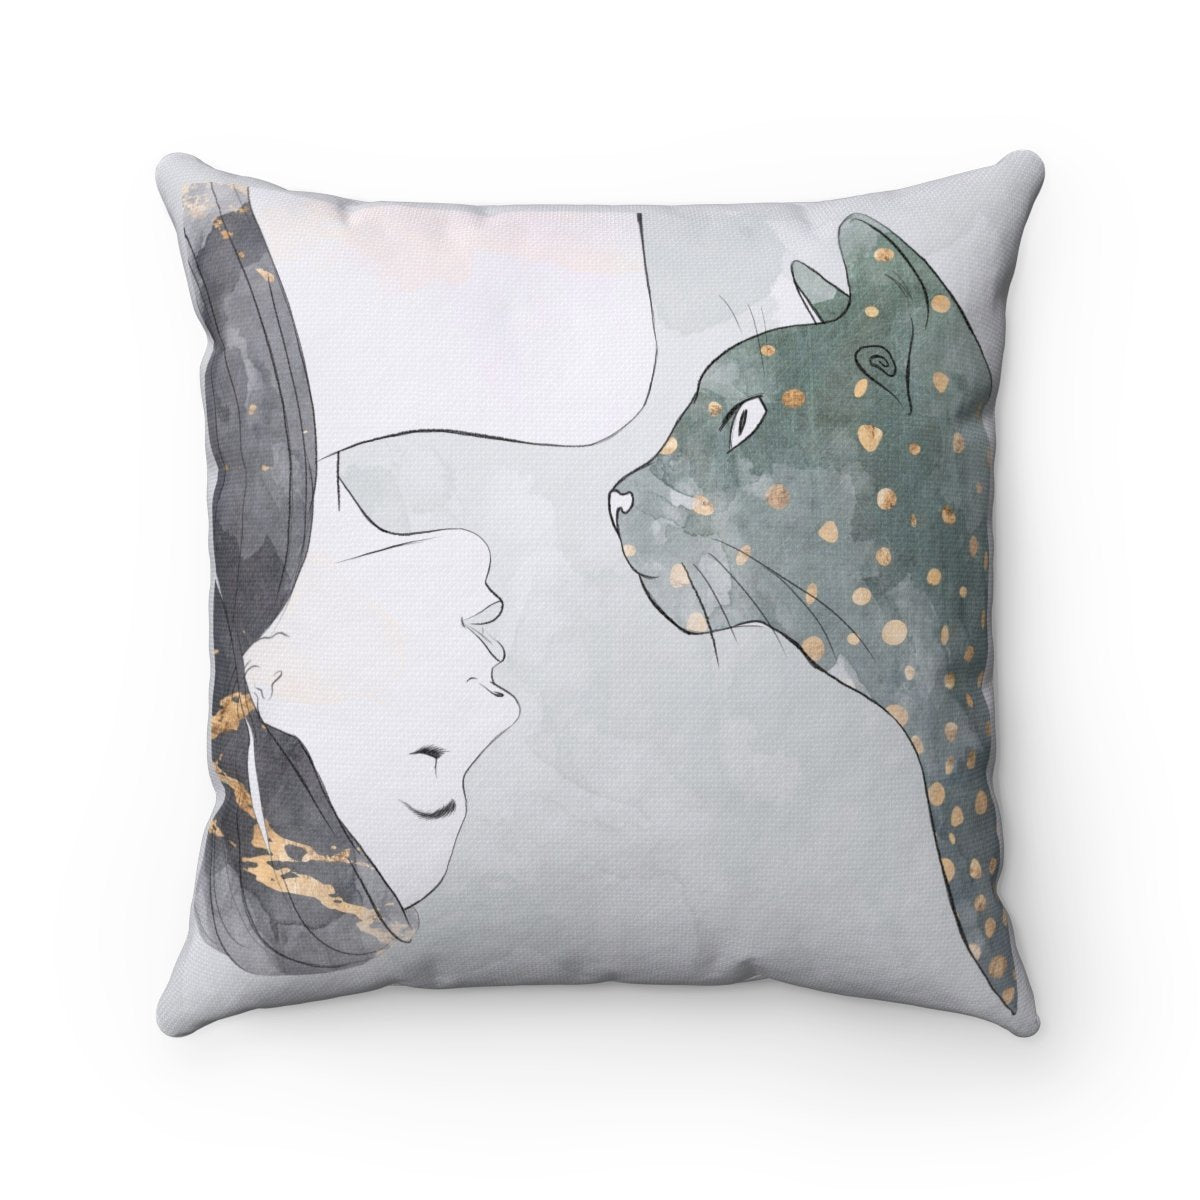 Cat Themed Bedding, Decorative Cat Pillow Featuring a One of a Kind Print of a Woman and a Tabby Cat